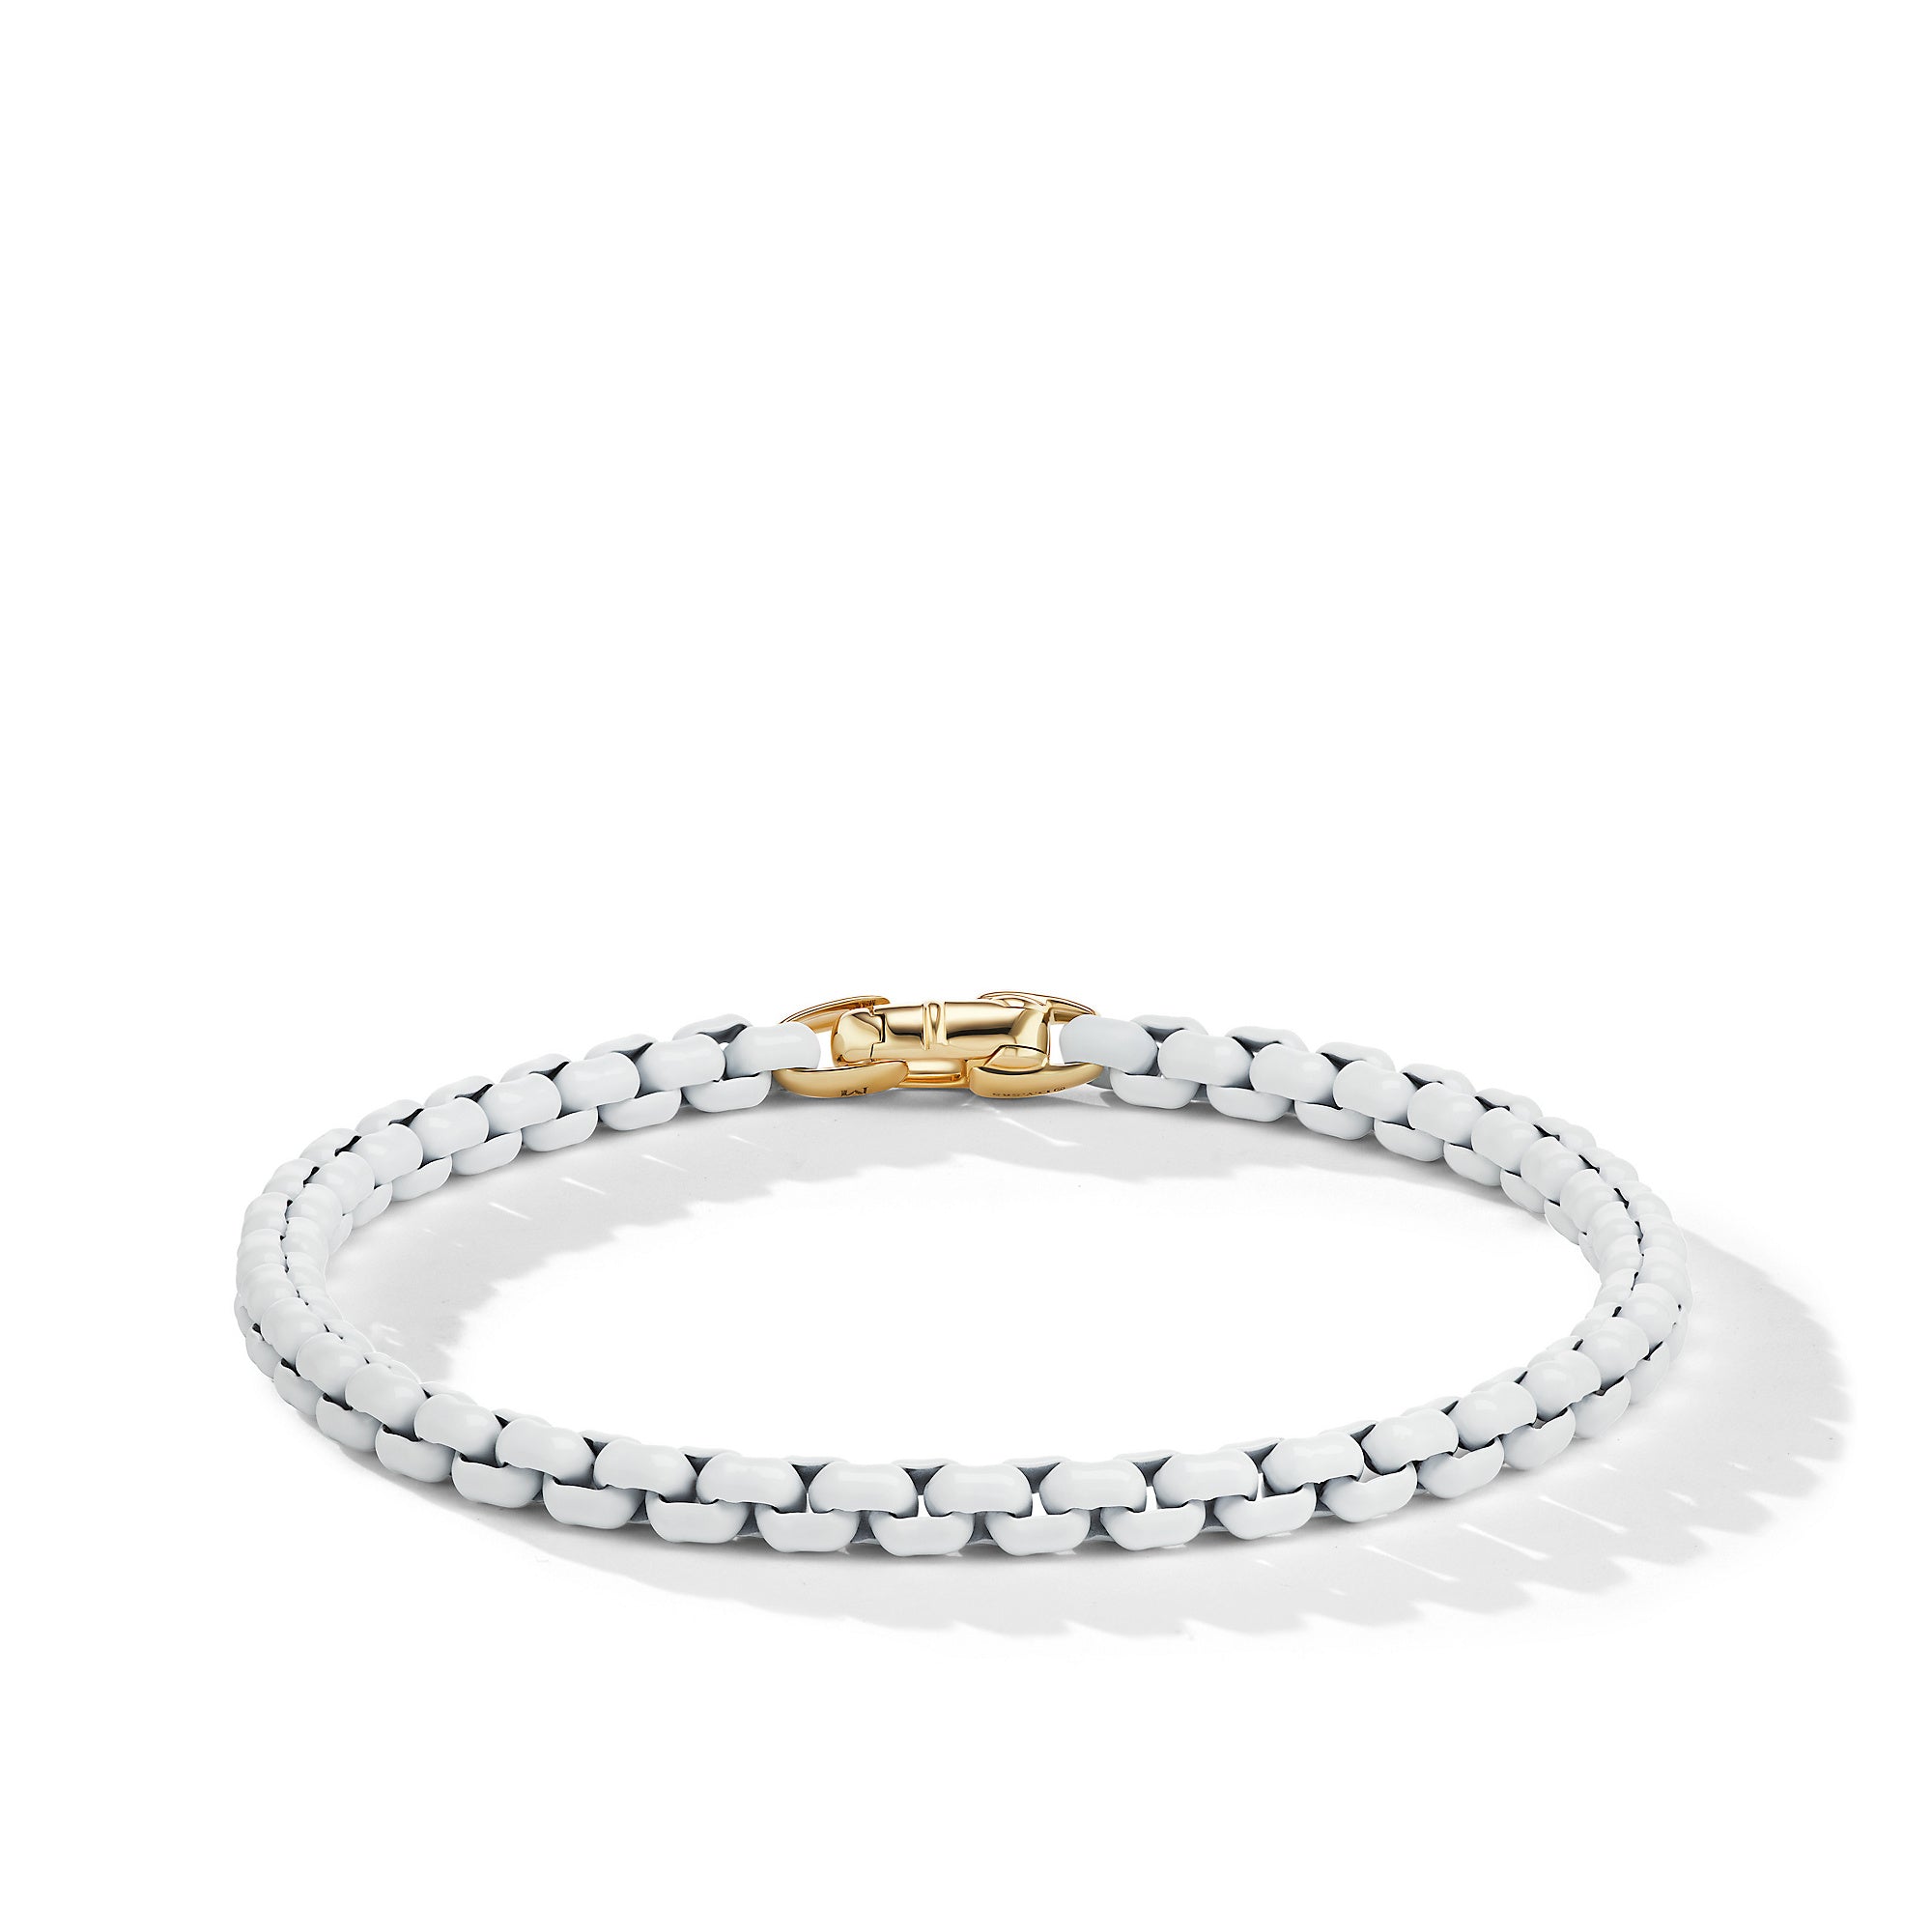 David Yurman Bel Aire Chain Bracelet in White with 14K Yellow Gold Accent, Size Medium